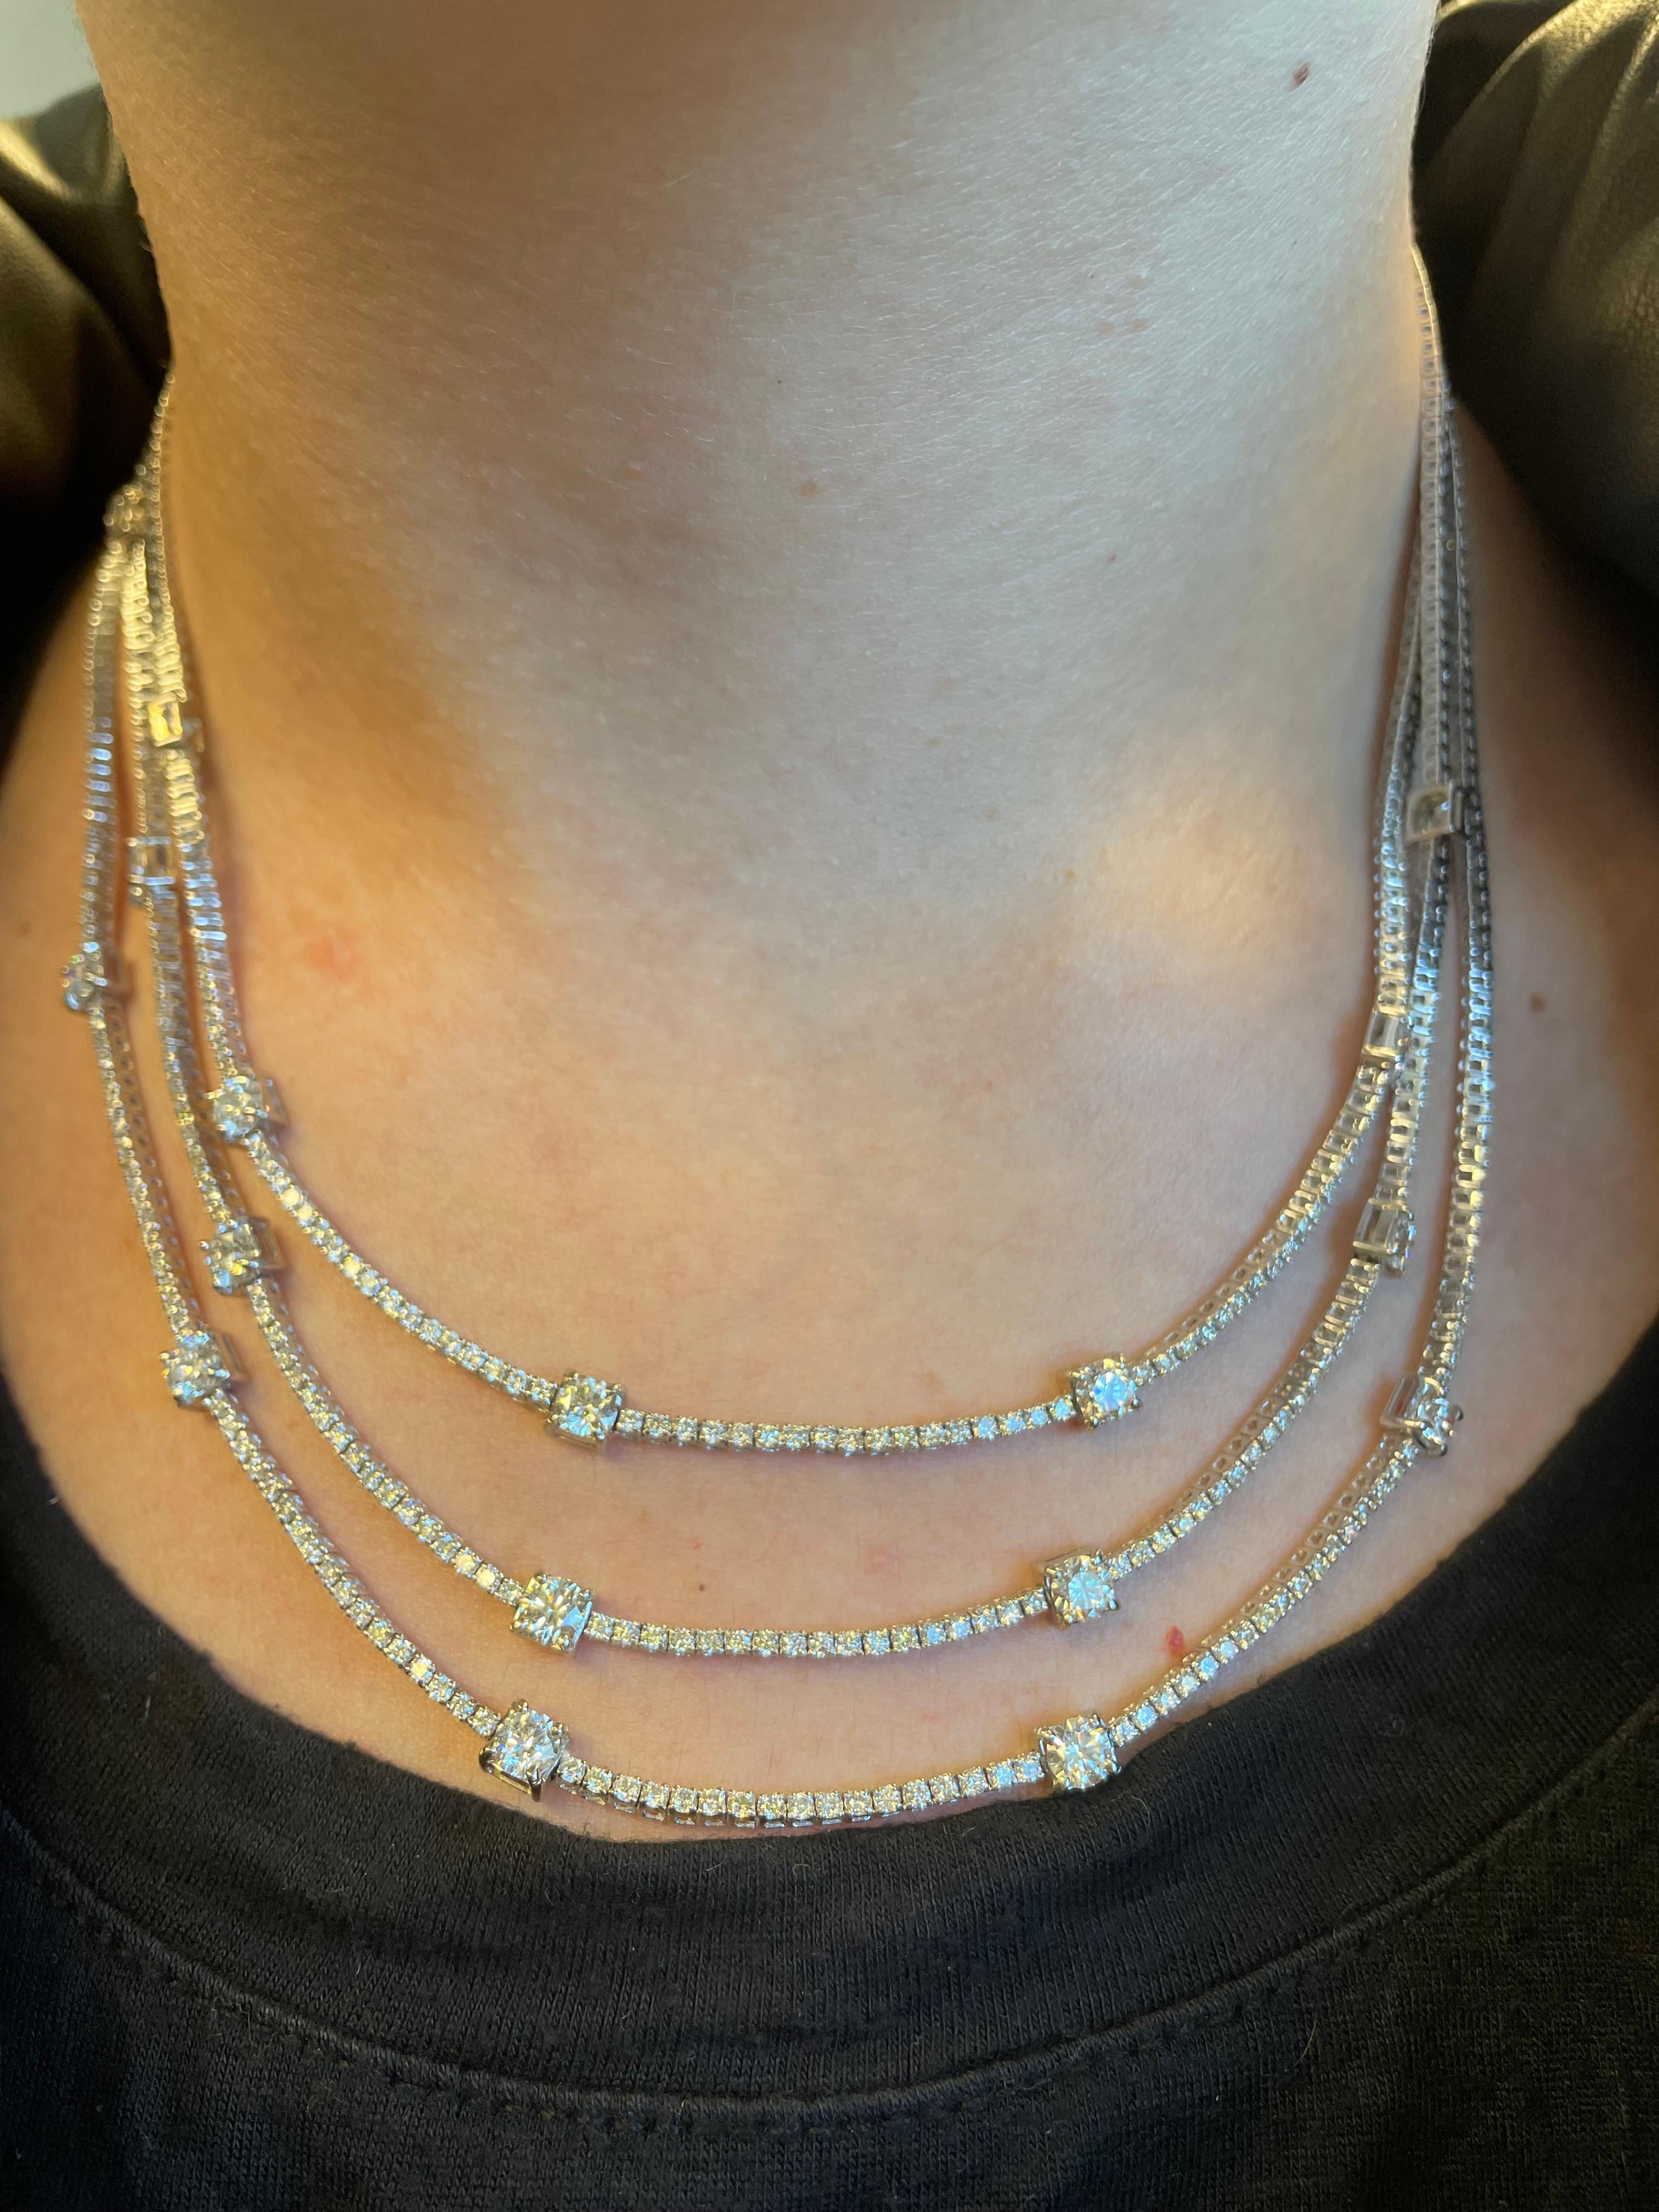 Sensational 3 row diamond tennis necklace. High jewelry by Alexander of Beverly Hills.
17 larger round brilliant diamonds, 5.65 carats. Along with 666 round brilliant diamonds, 8.75 carats. Approximately H/I color and SI clarity. 18k white gold.